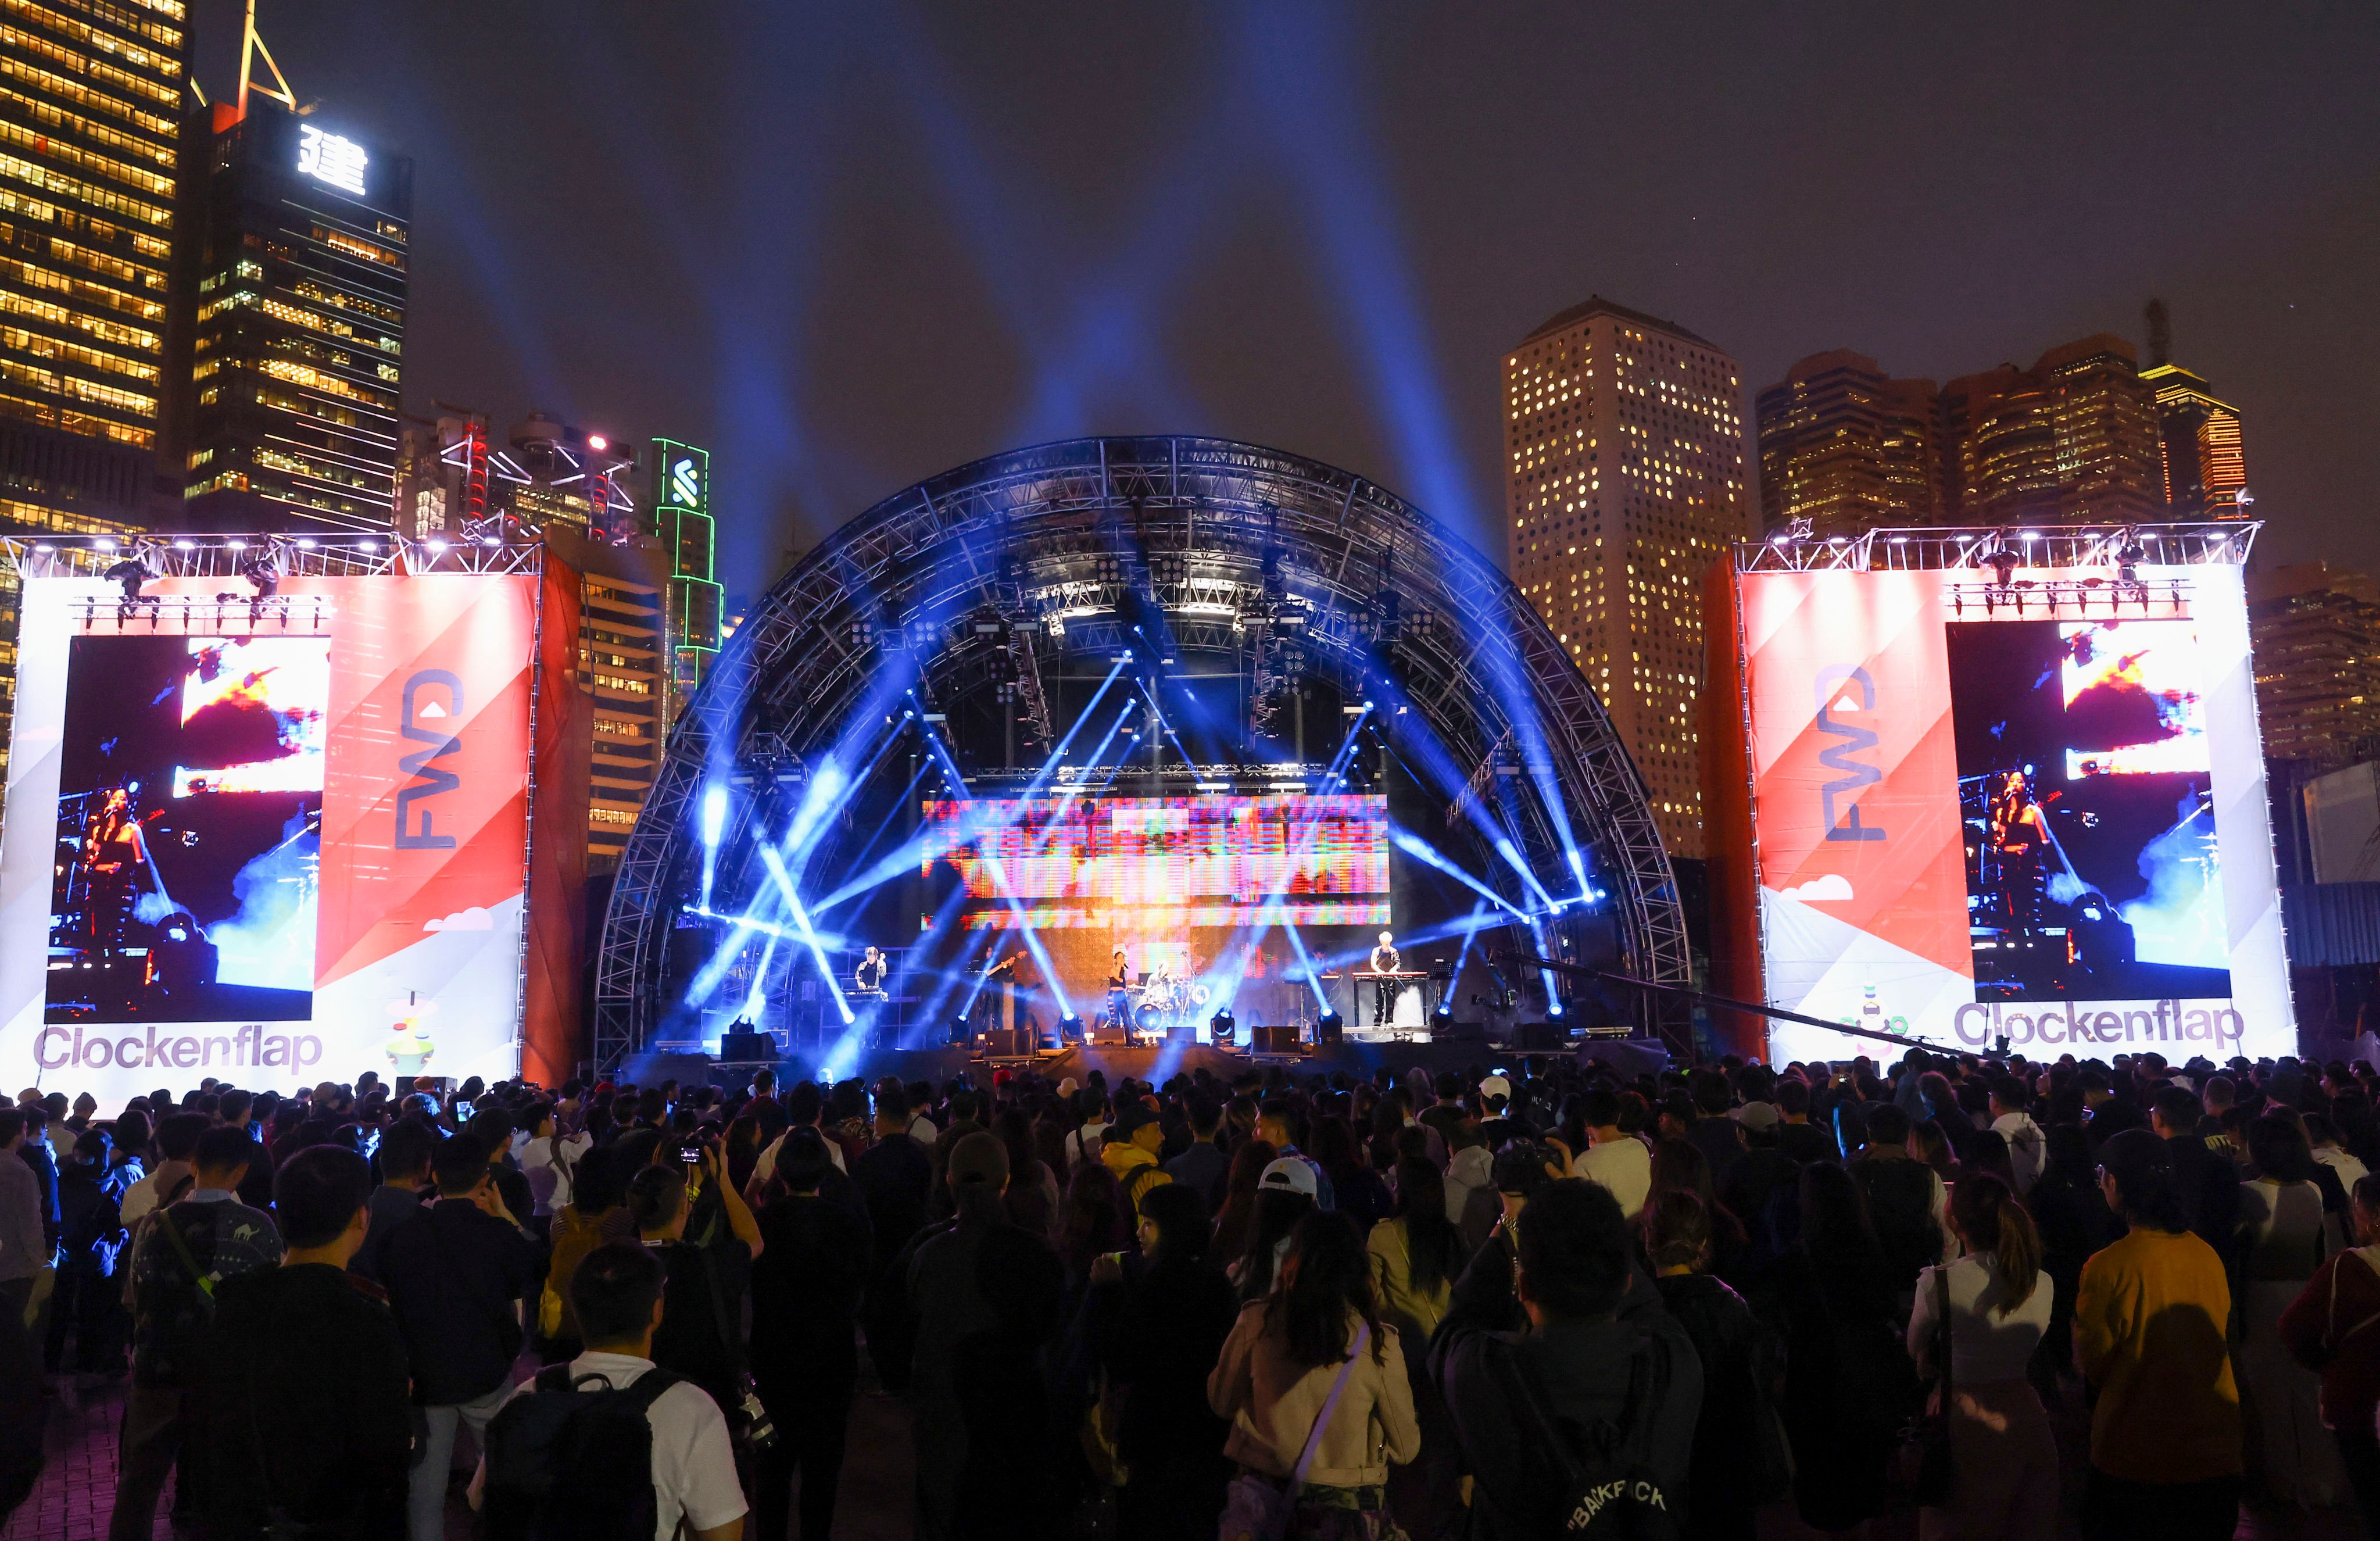 How will December’s Clockenflap festival differ from the March edition? Justin Sweeting, Clockenflap co-founder and head of music, talks to the Post. Photo: Dickson Lee